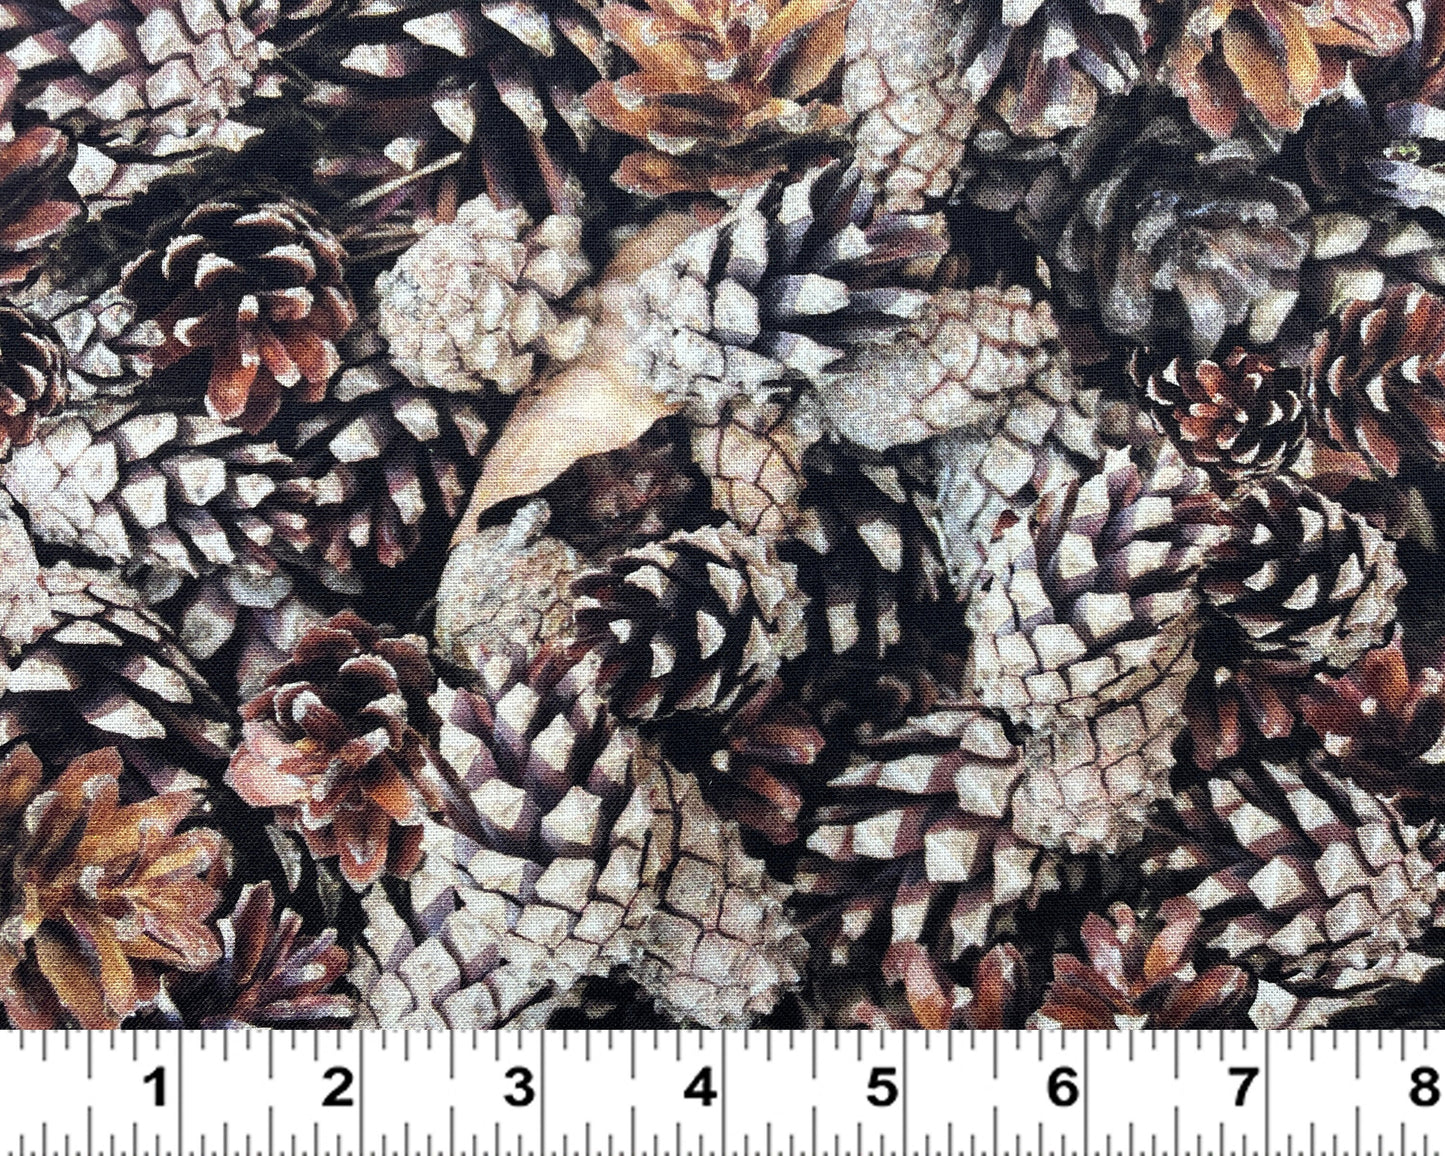 Pine cone fabric by the yard - Tree Farm Collection by Hoffman - 100% Cotton - Pine Tree material fall theme pinecones print -SHIPS NEXT DAY